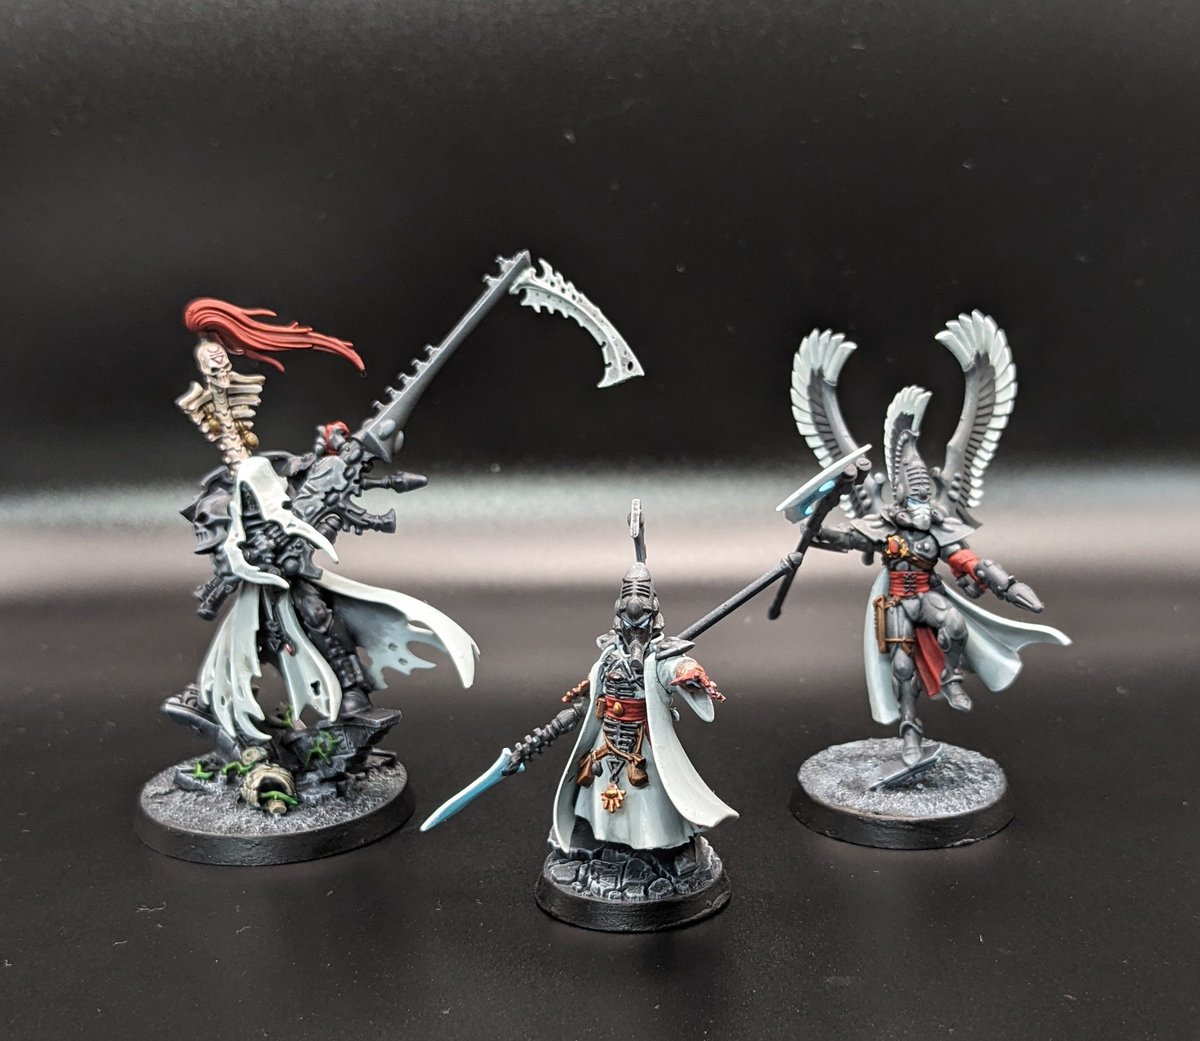 The Autarch makes three characters now for the Sca Ité revenants. Think they look pretty good together.

#Warhammer #WarhammerCommunity #Warhammer40000 #Aeldari